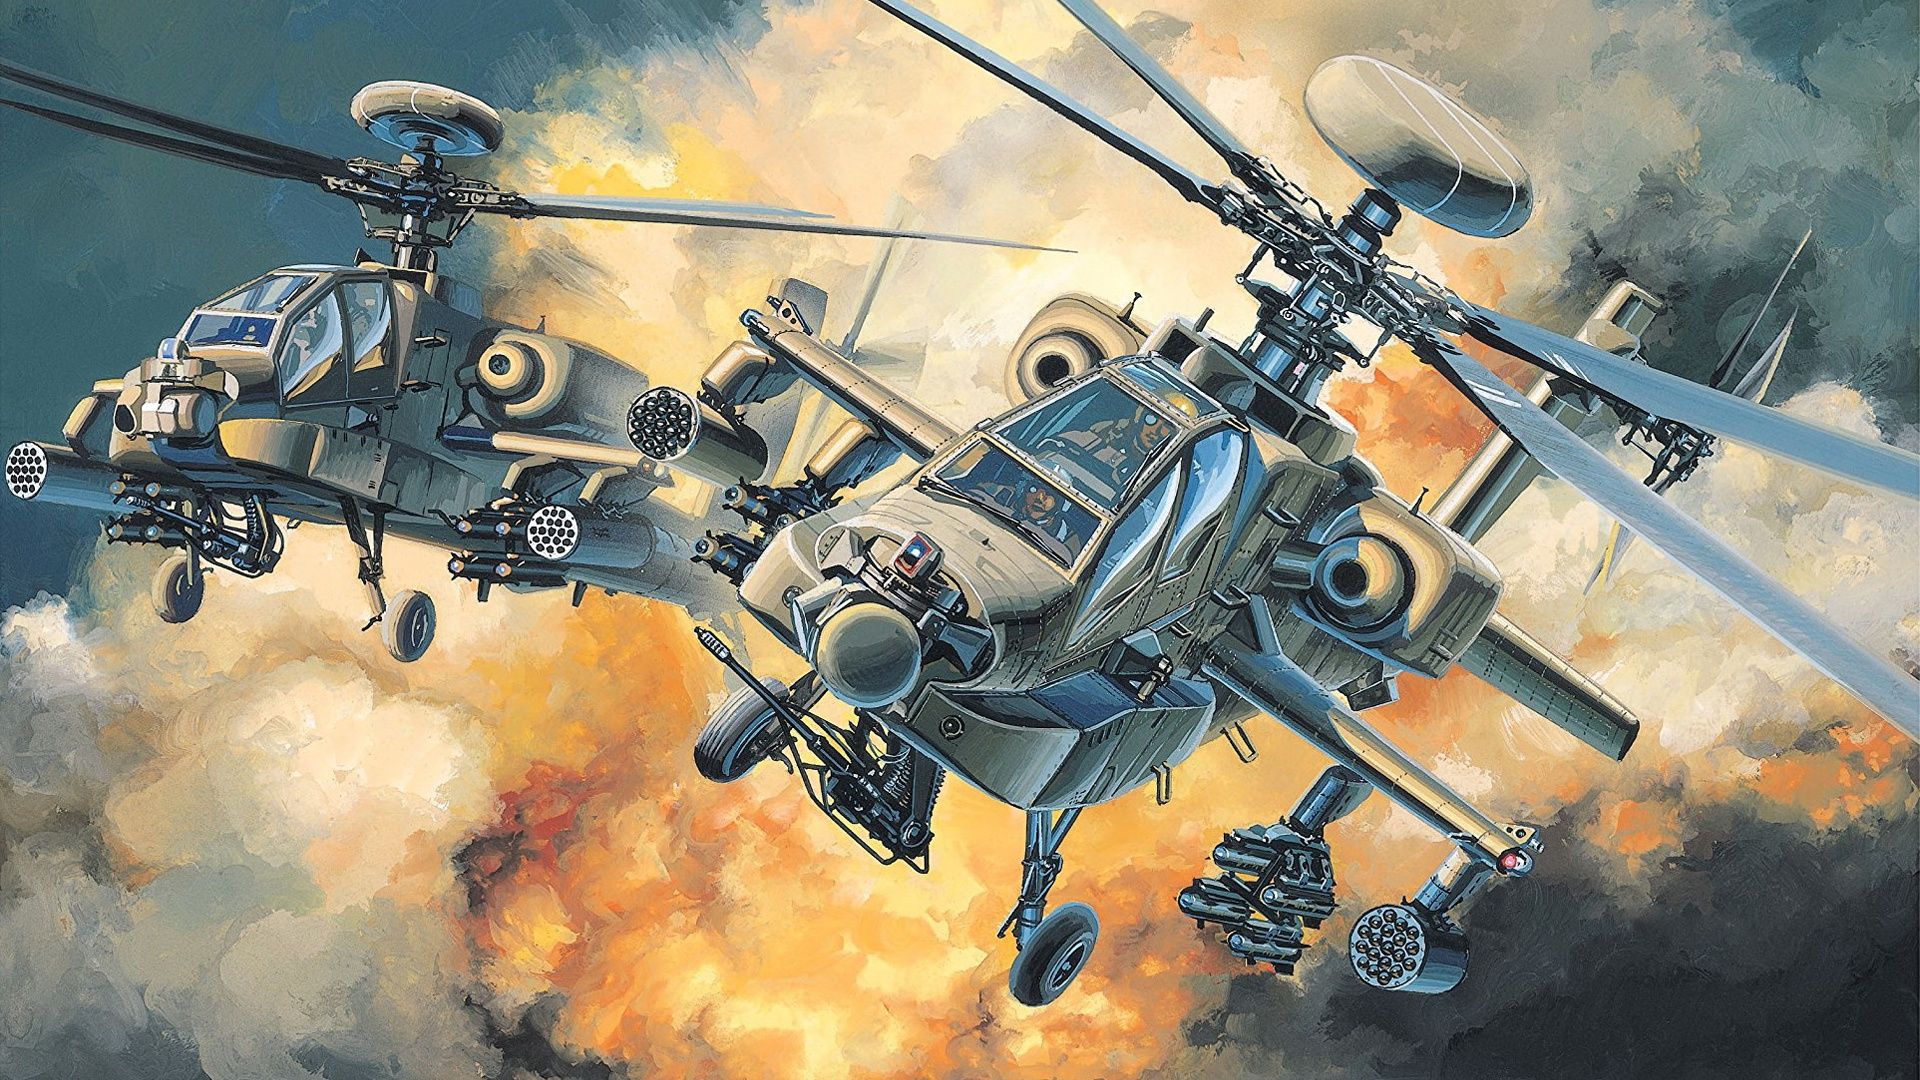 Attack Helicopter HD wallpaper, background